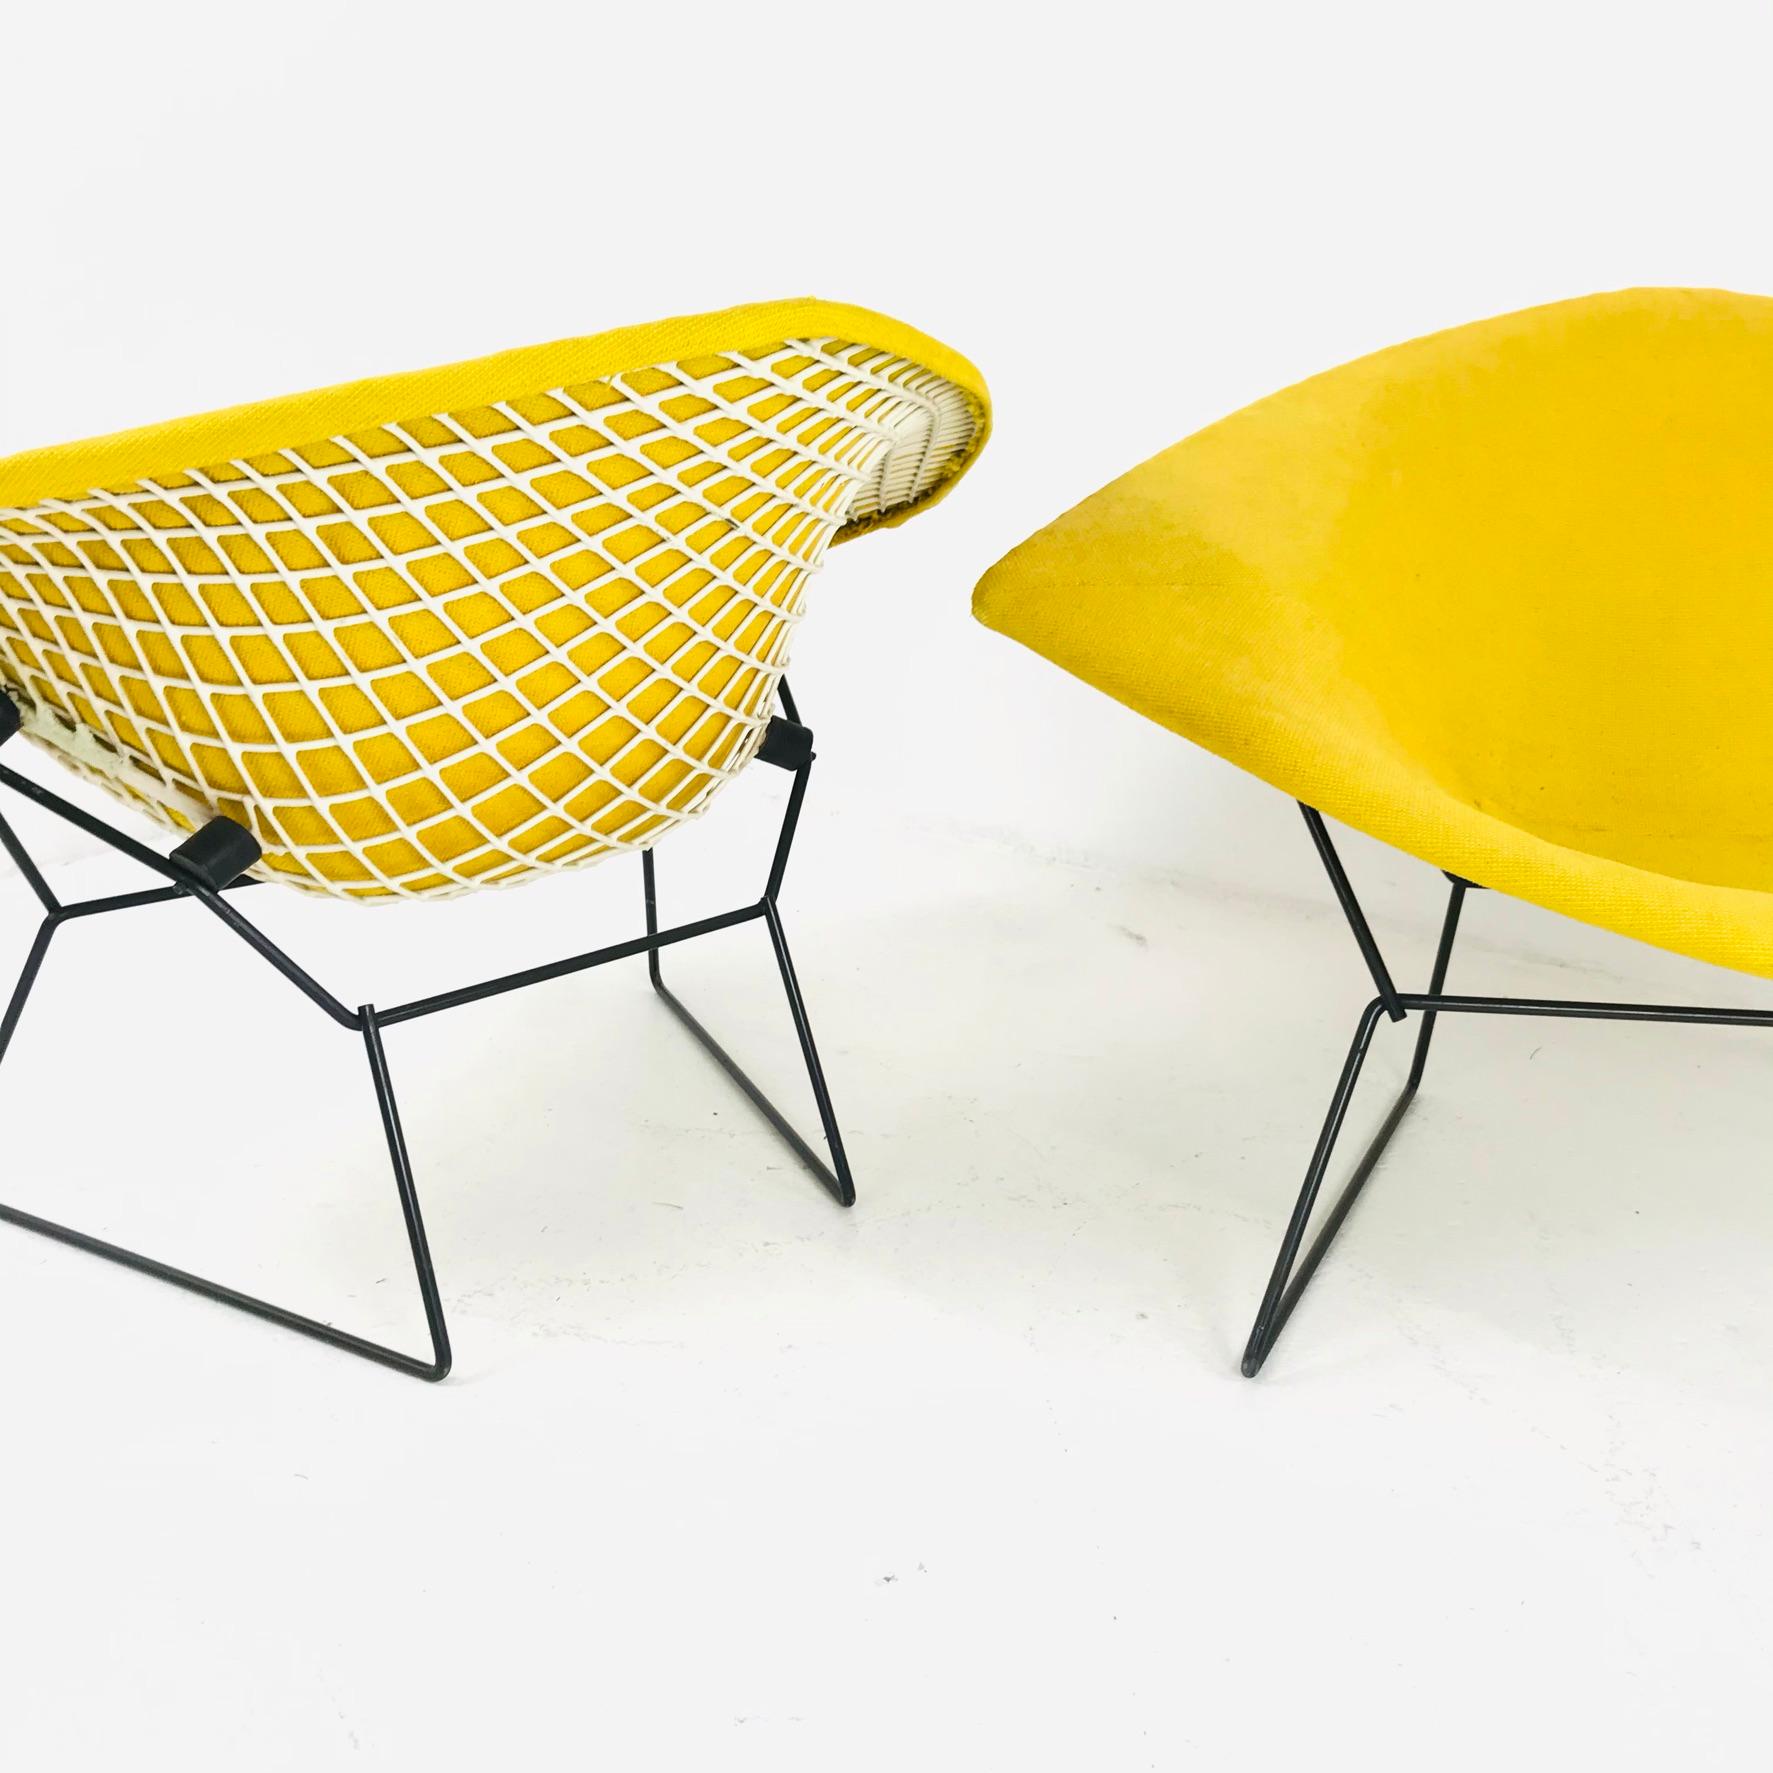 Mid-20th Century Pair of Large Diamond Chairs by Harry Bertoia for Knoll